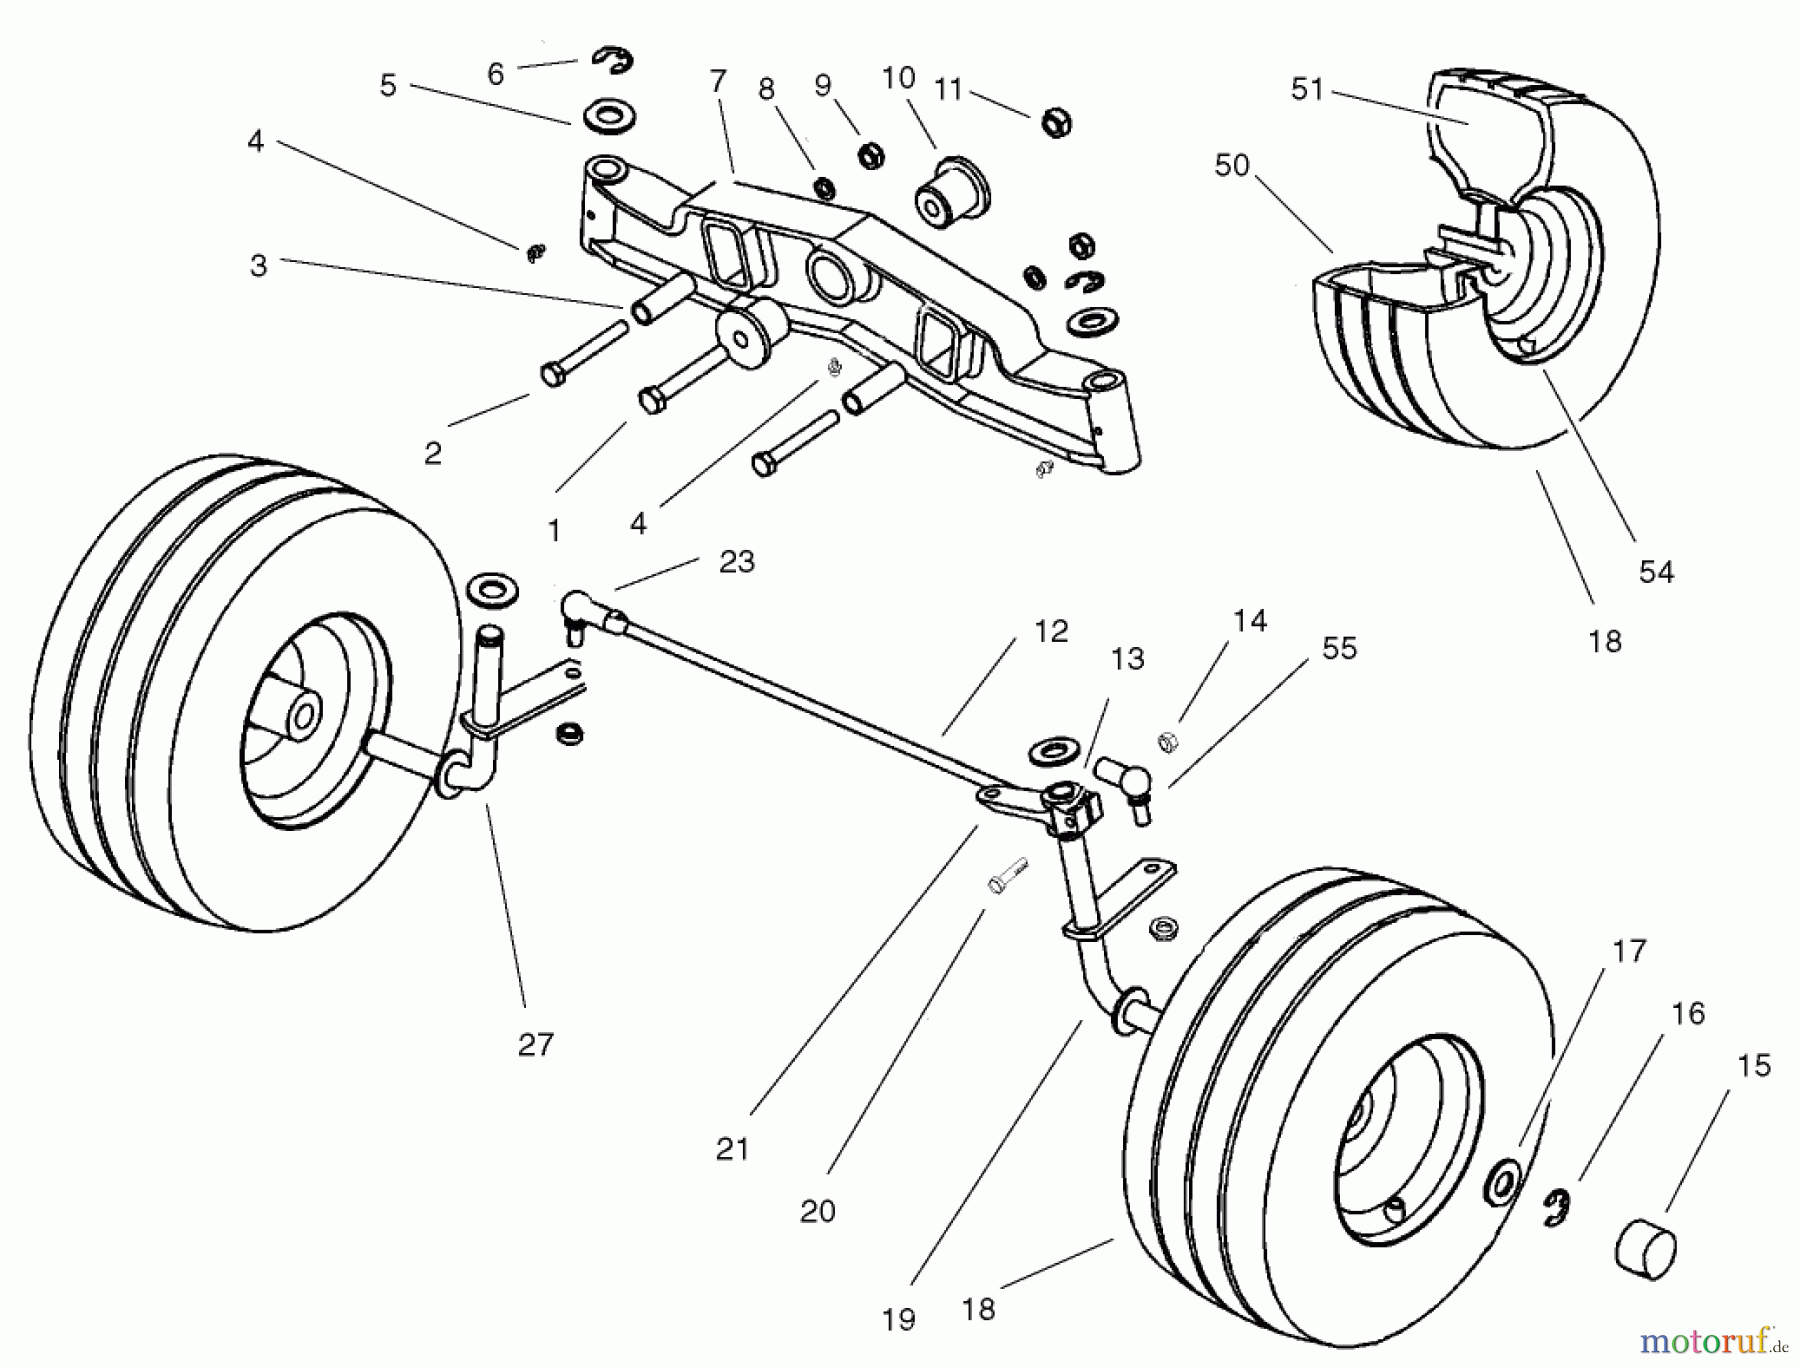  Toro Neu Mowers, Lawn & Garden Tractor Seite 1 74590 (190-DH) - Toro 190-DH Lawn Tractor, 2001 (210000001-210999999) FRONT AXLE ASSEMBLY